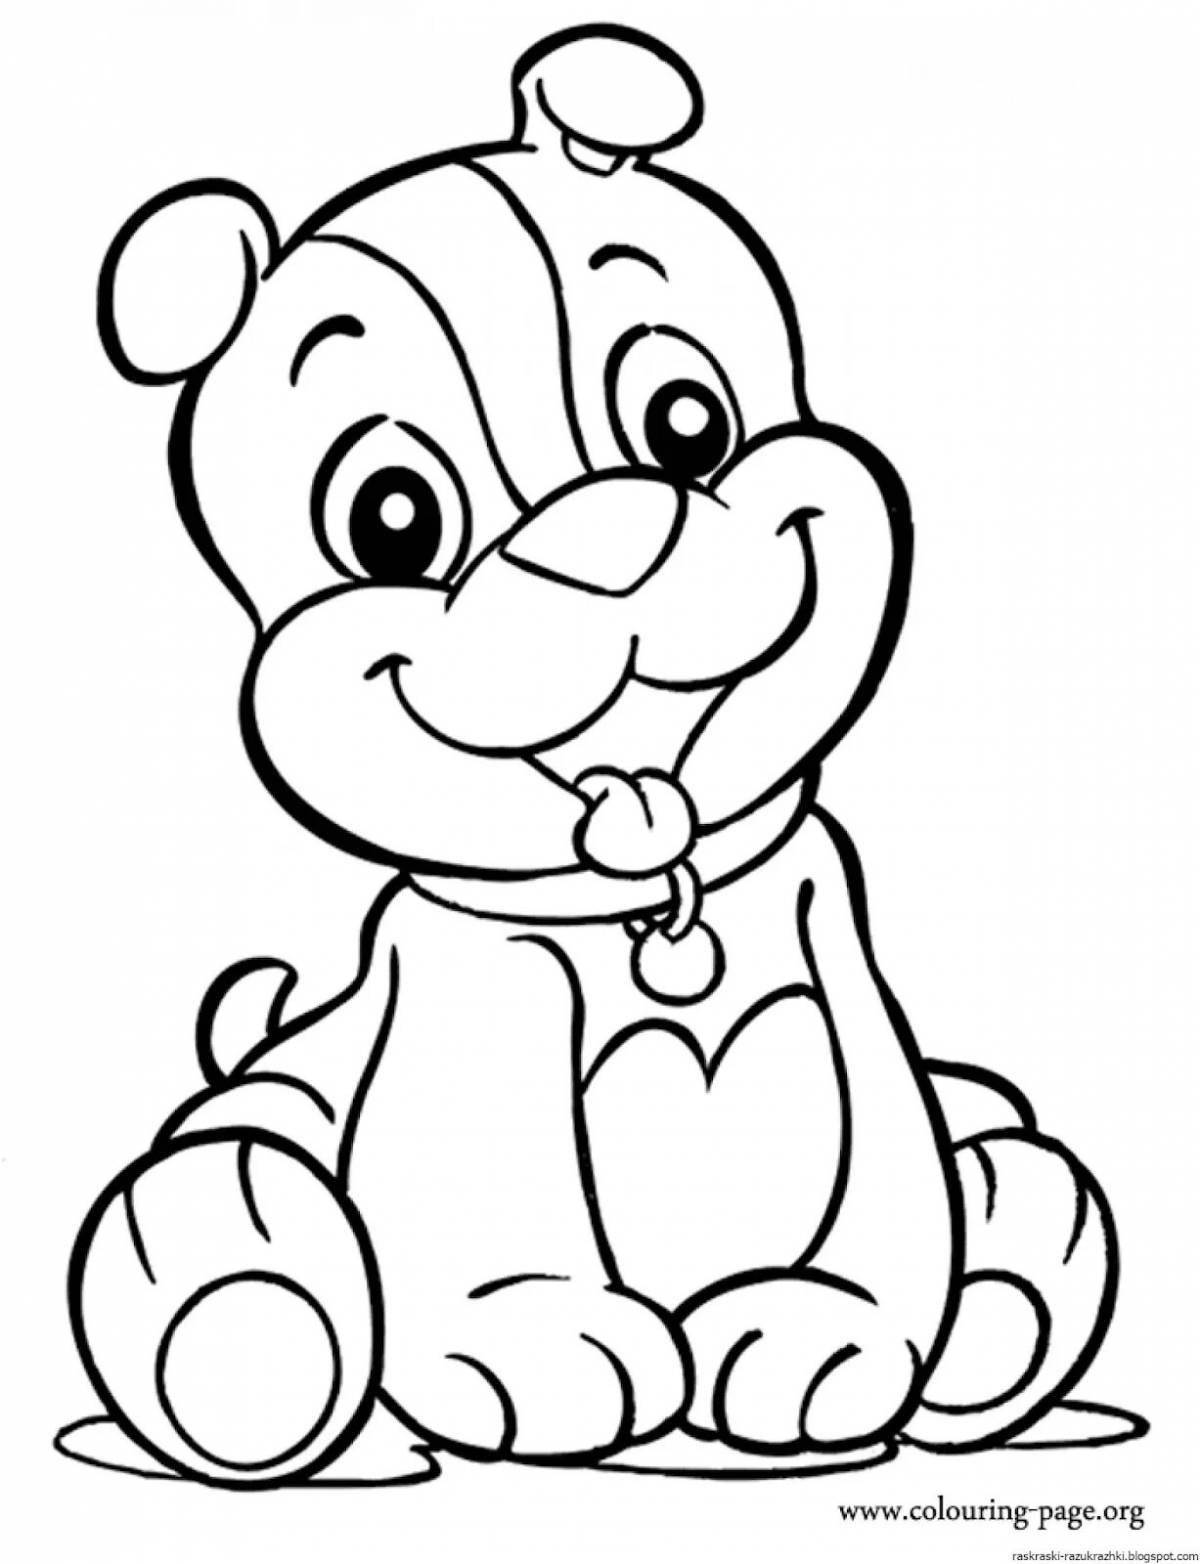 Fabulous animal coloring pages for kids